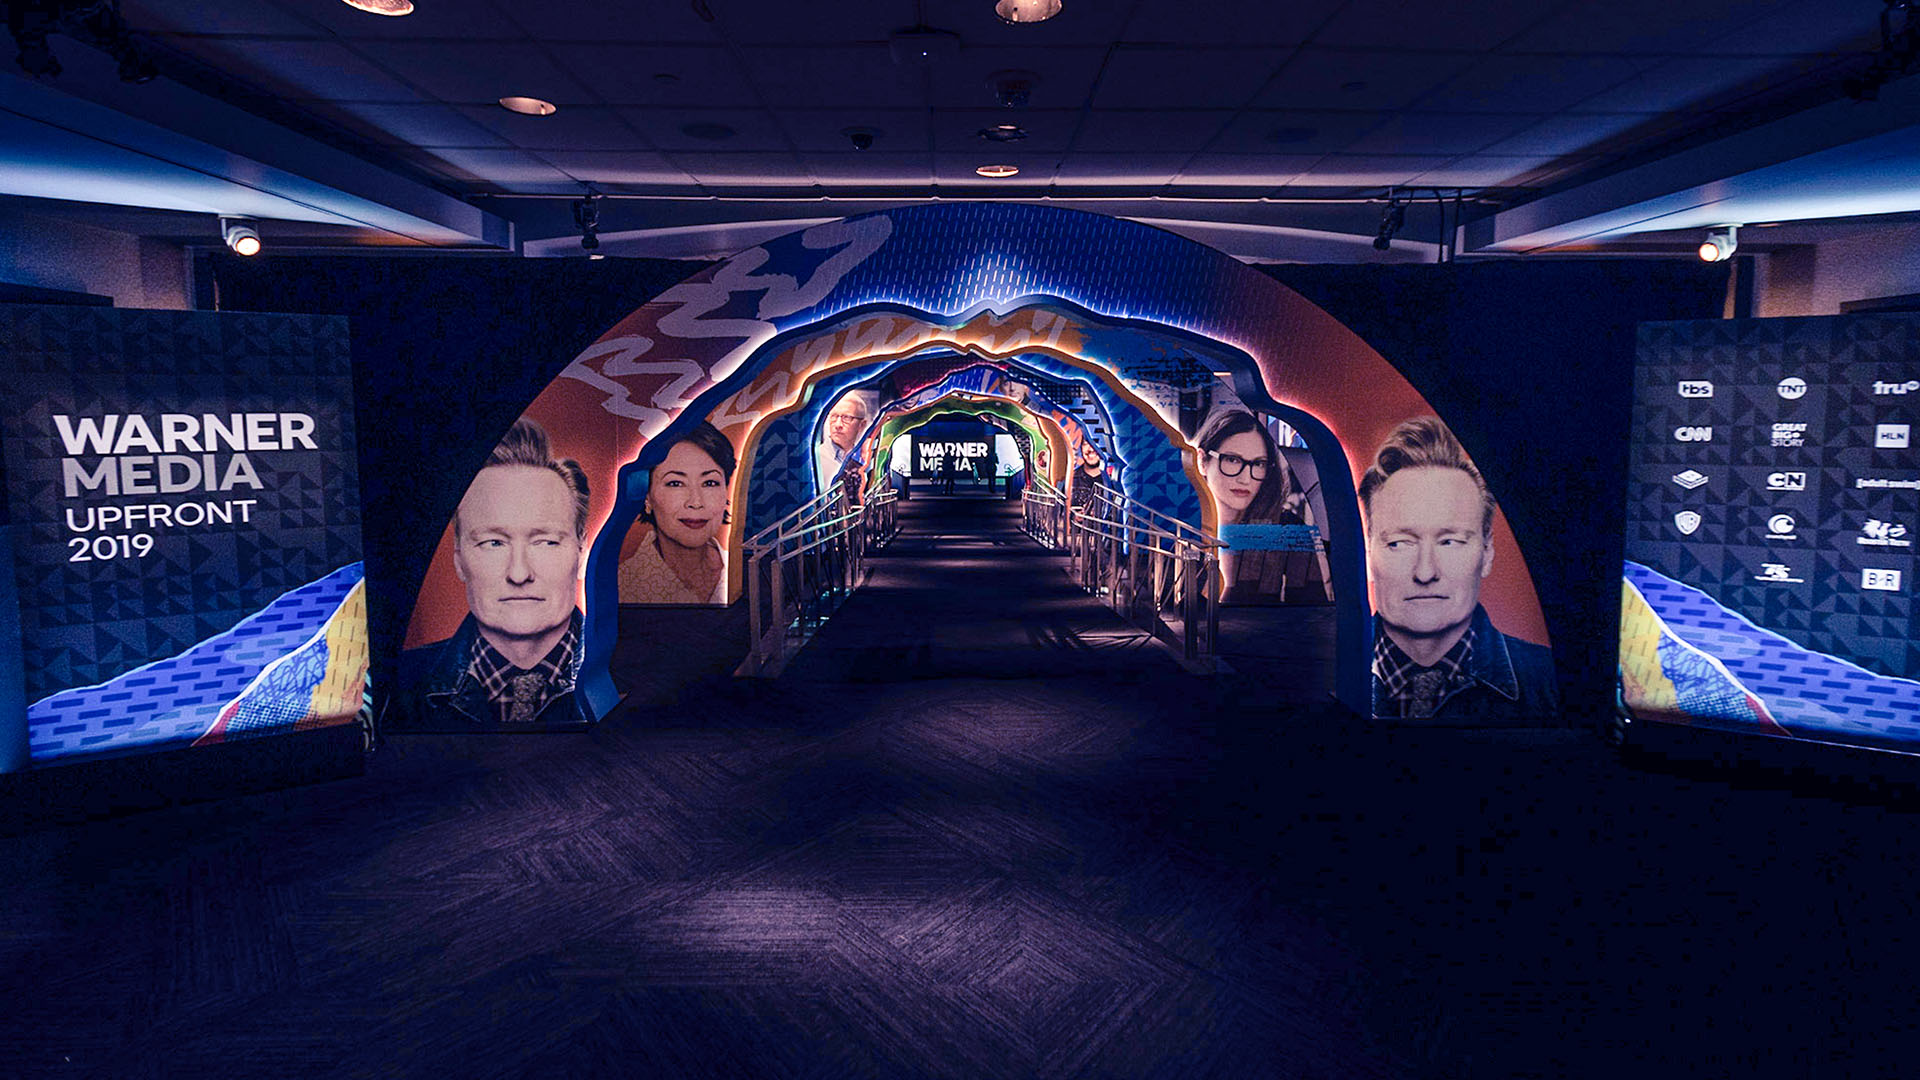 video tunnel displaying conan obrien, anderson cooper, and other media personalities